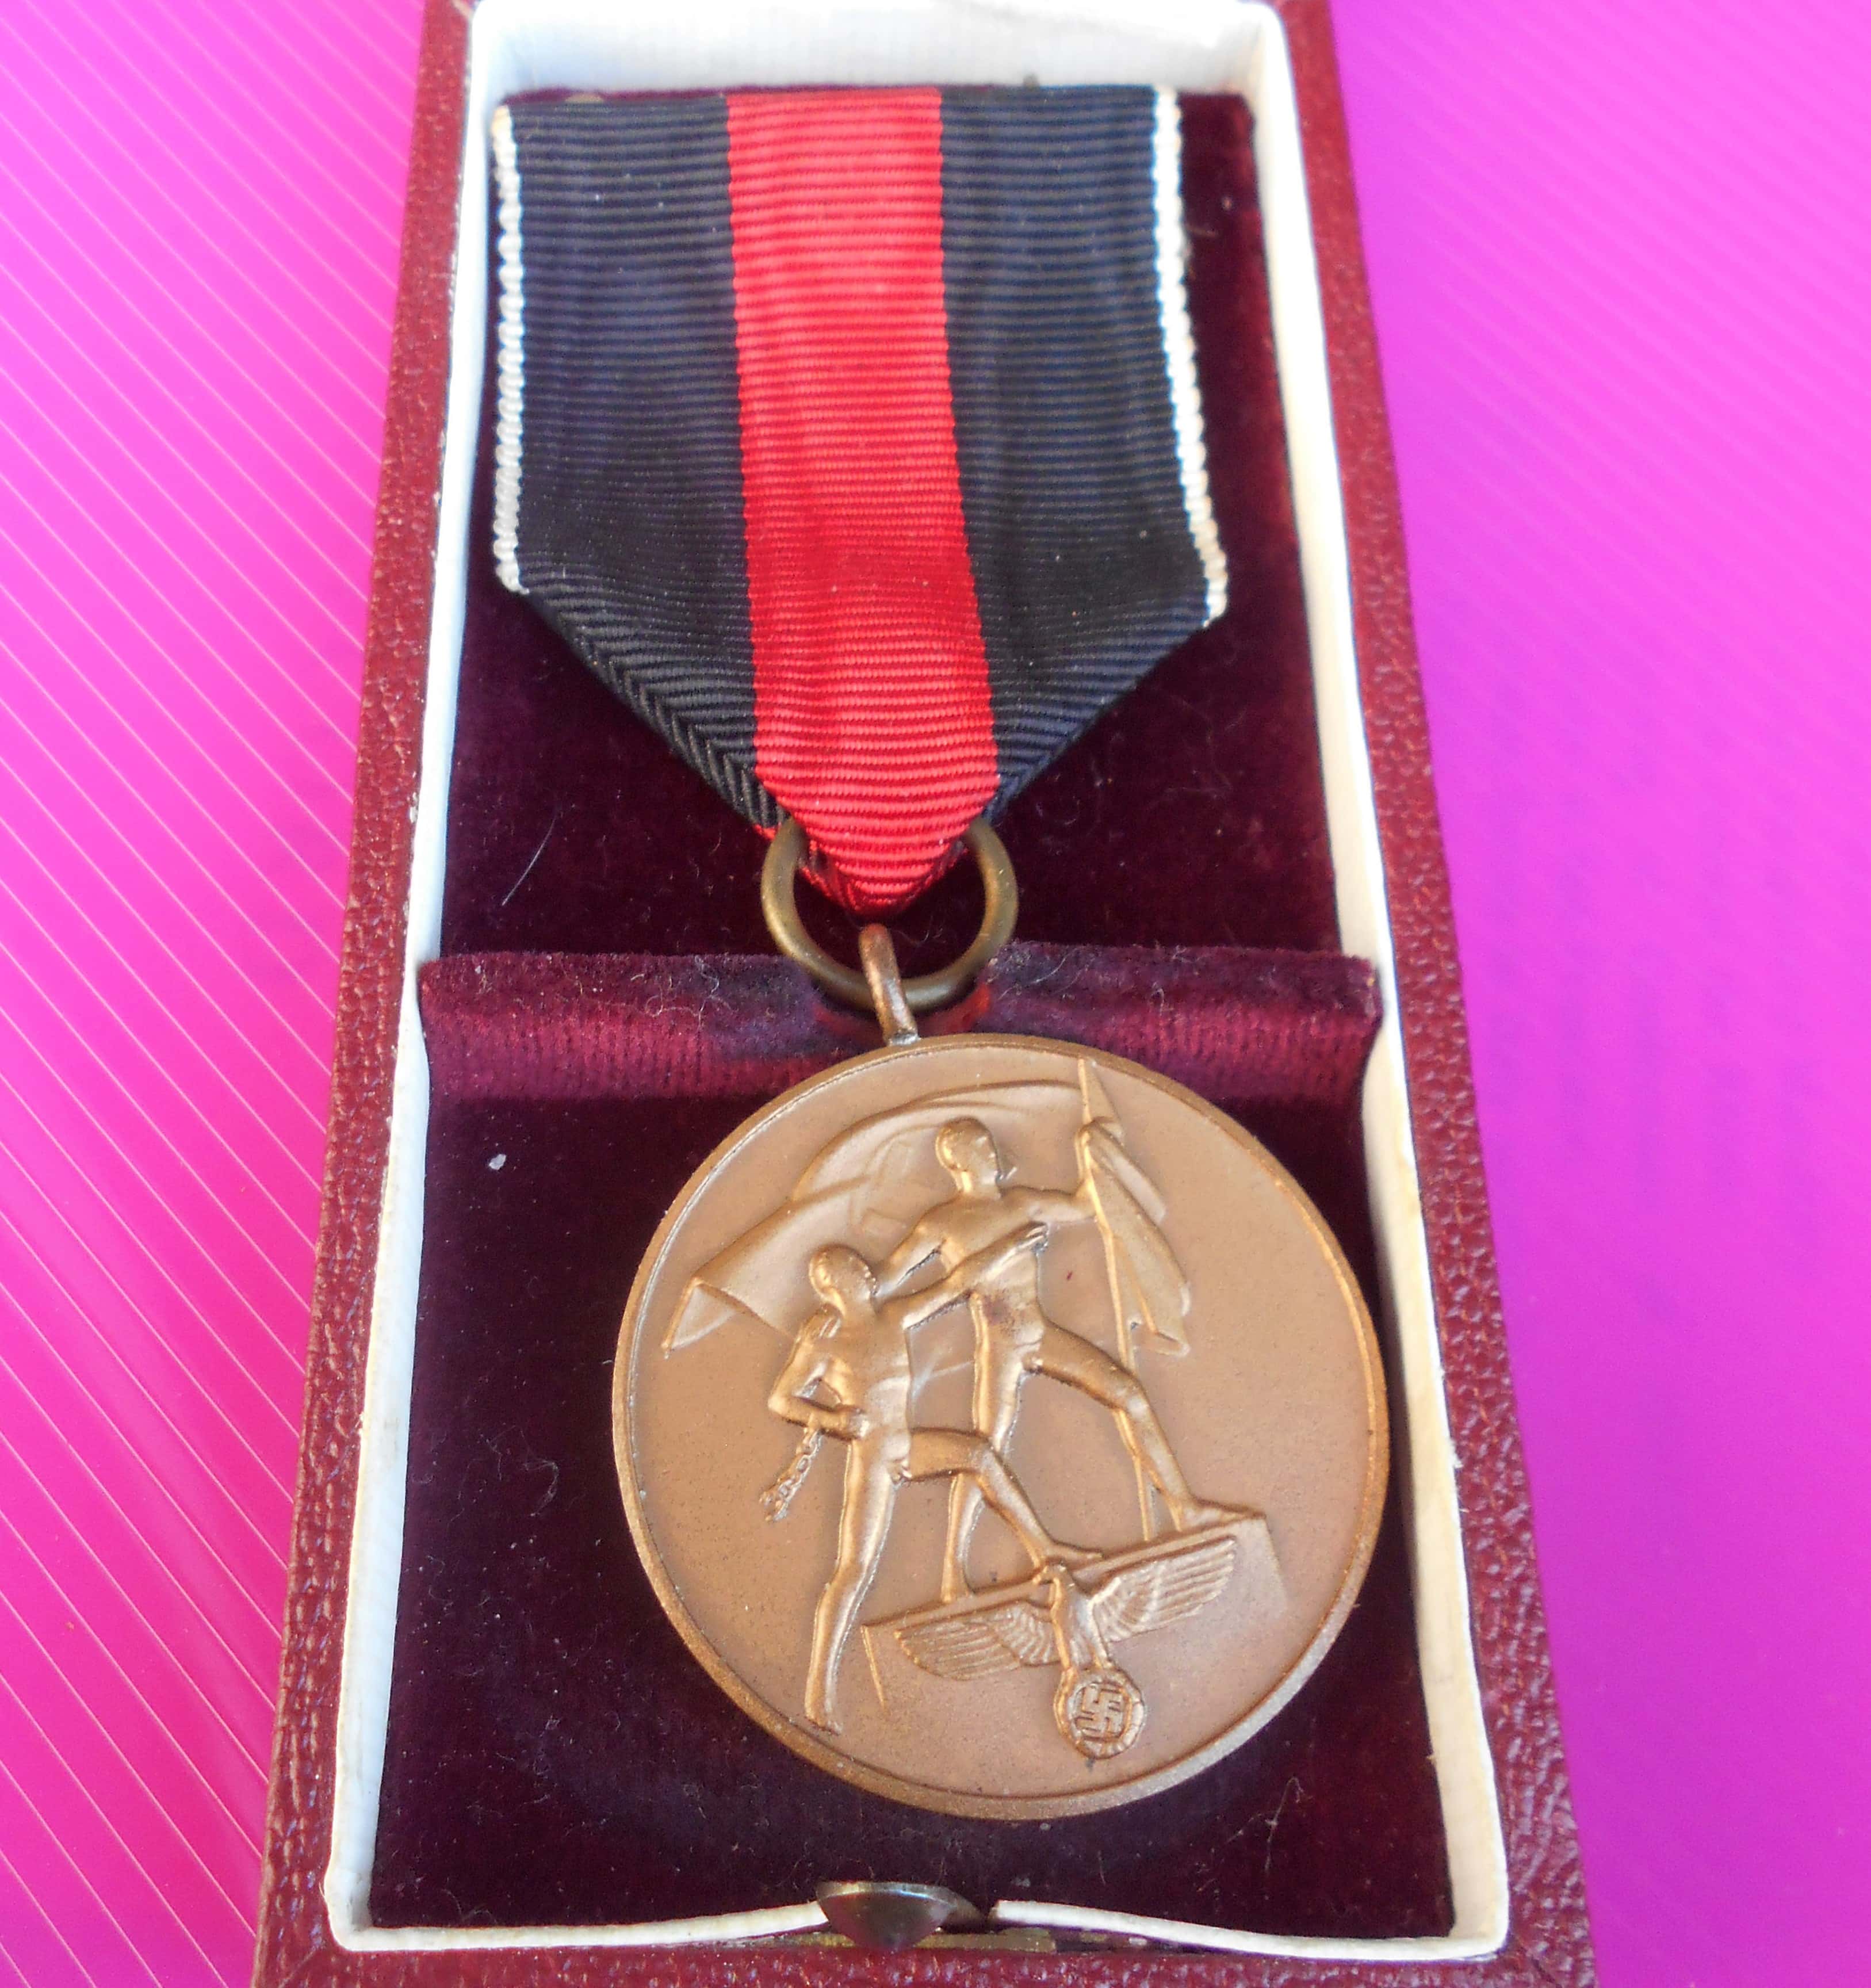 Cased Sudetenland Medal - AA antiques